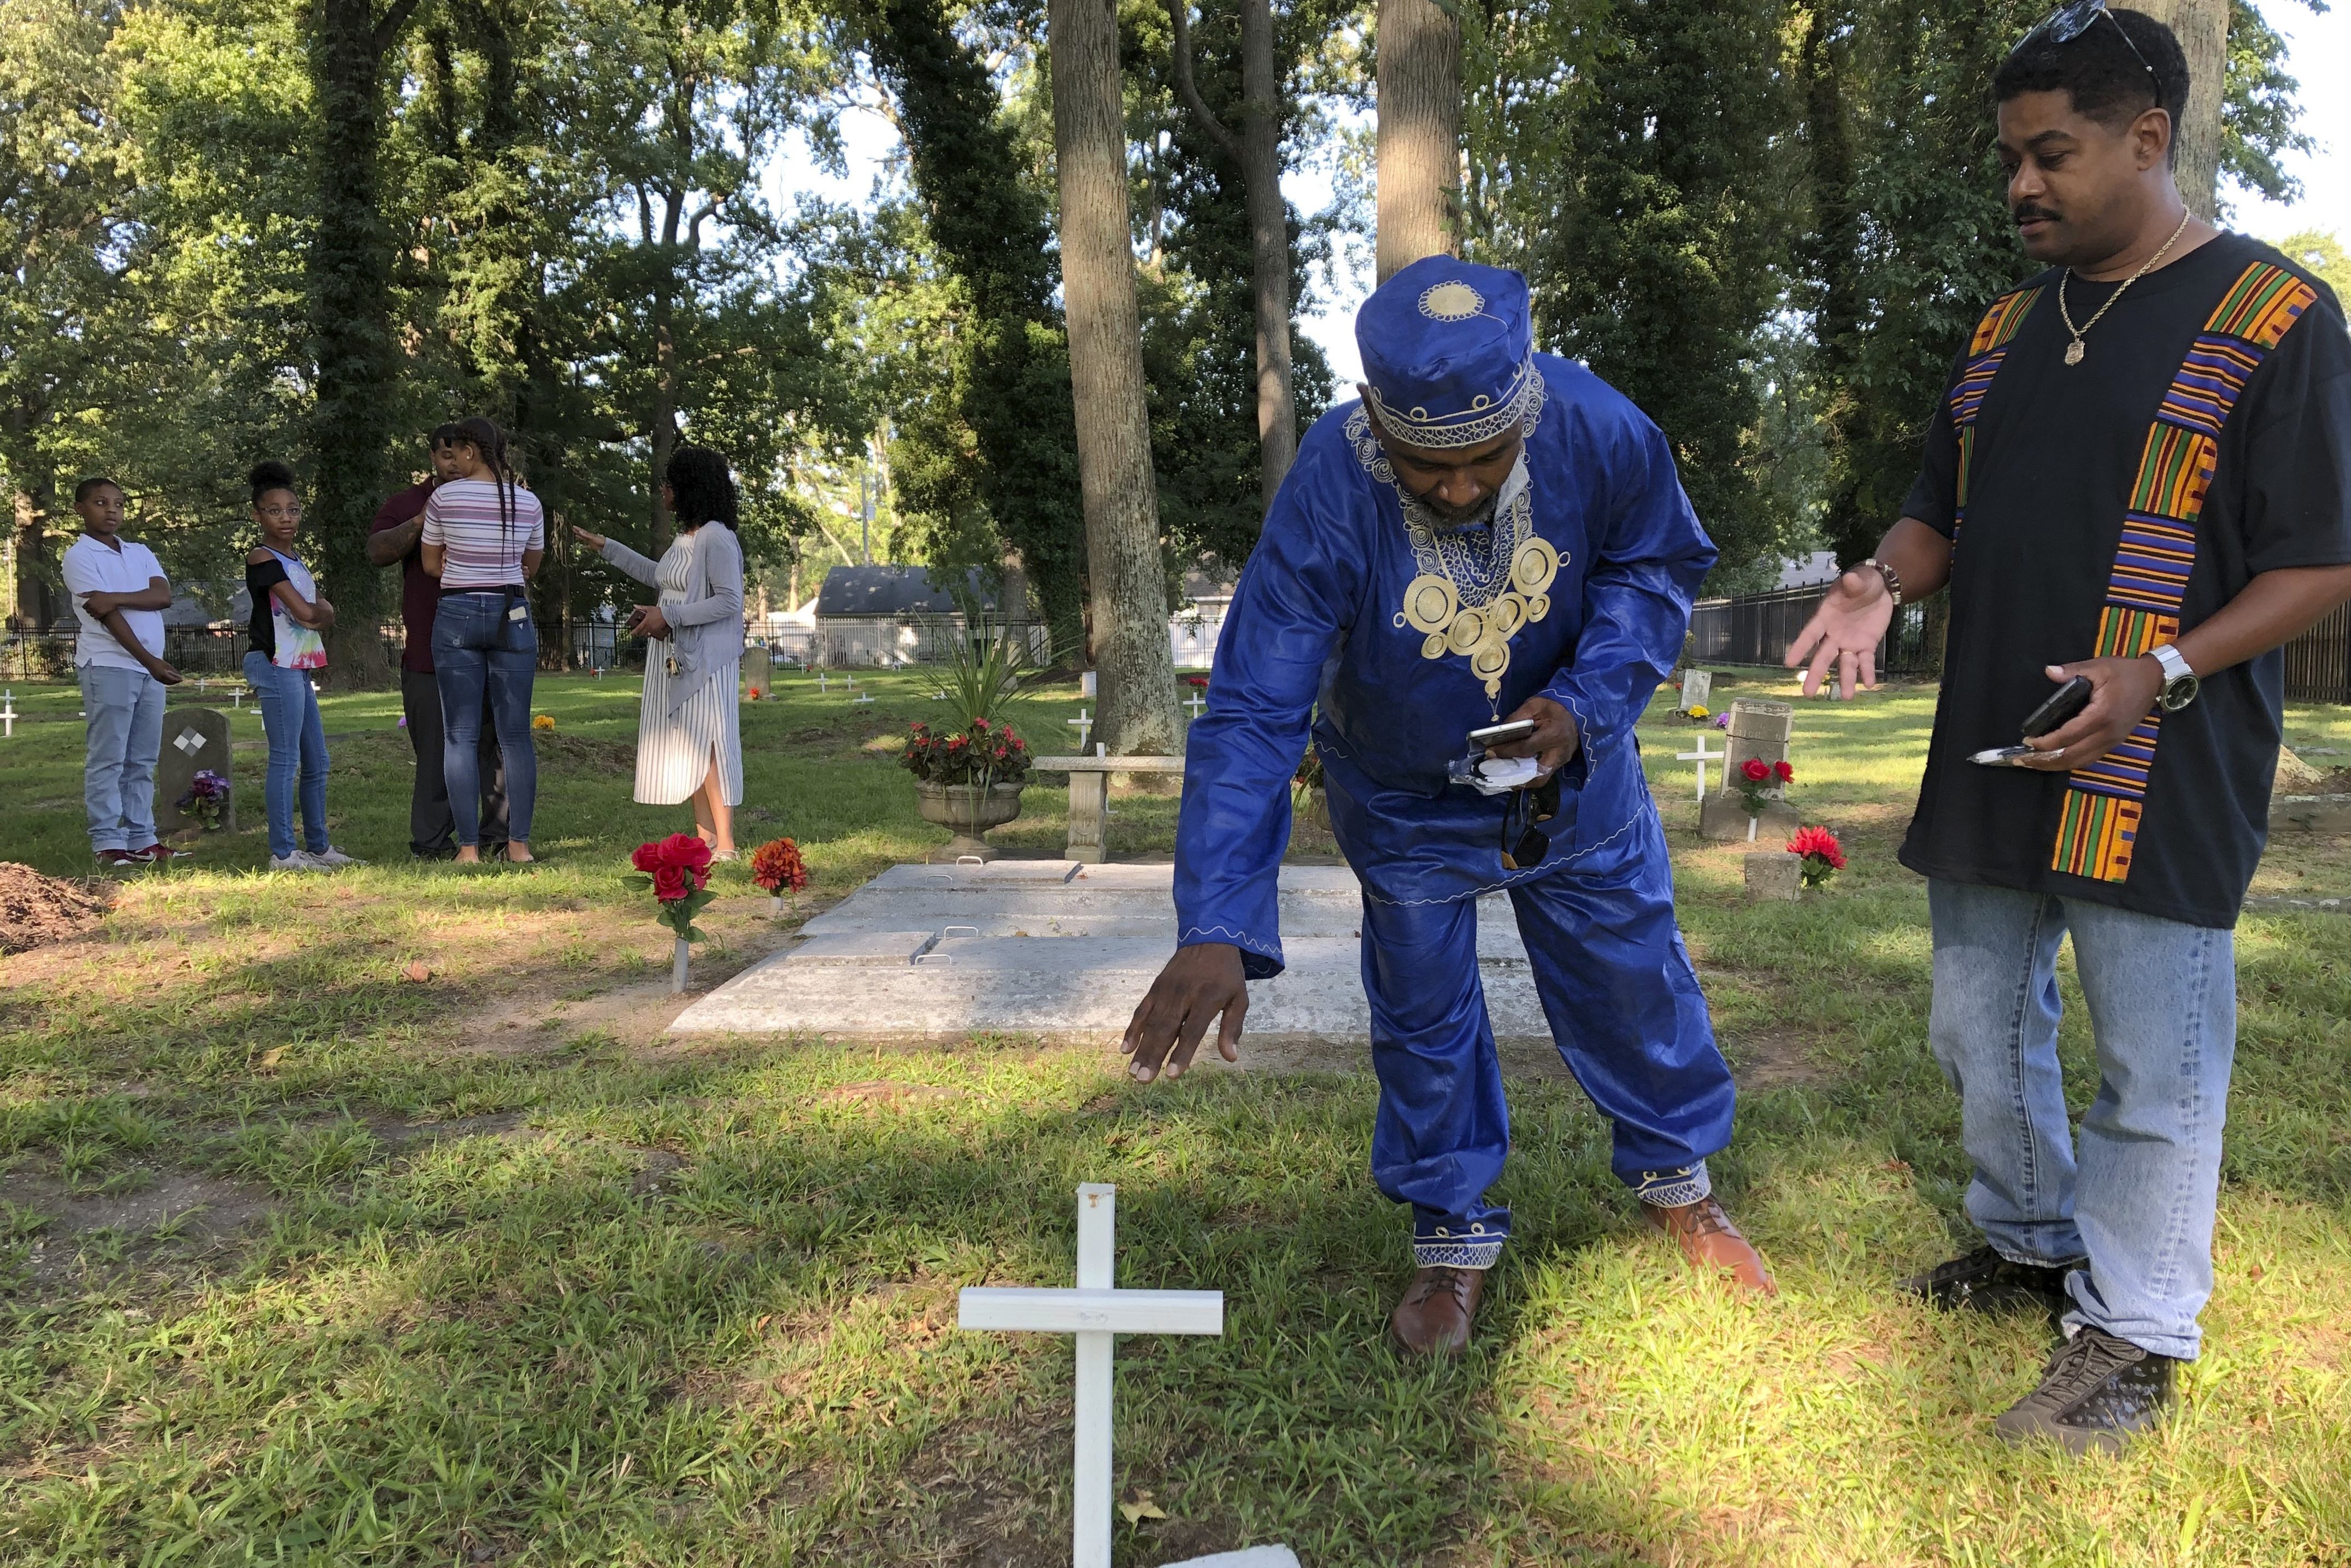 Andre Bradshaw, left, and Eric Jackson at an unmarked grave at the Tucker Family Cemetery in Hampton. They are part of a larger family that traces its roots back to the first enslaved Africans to arrive in what is now Virginia in 1619 